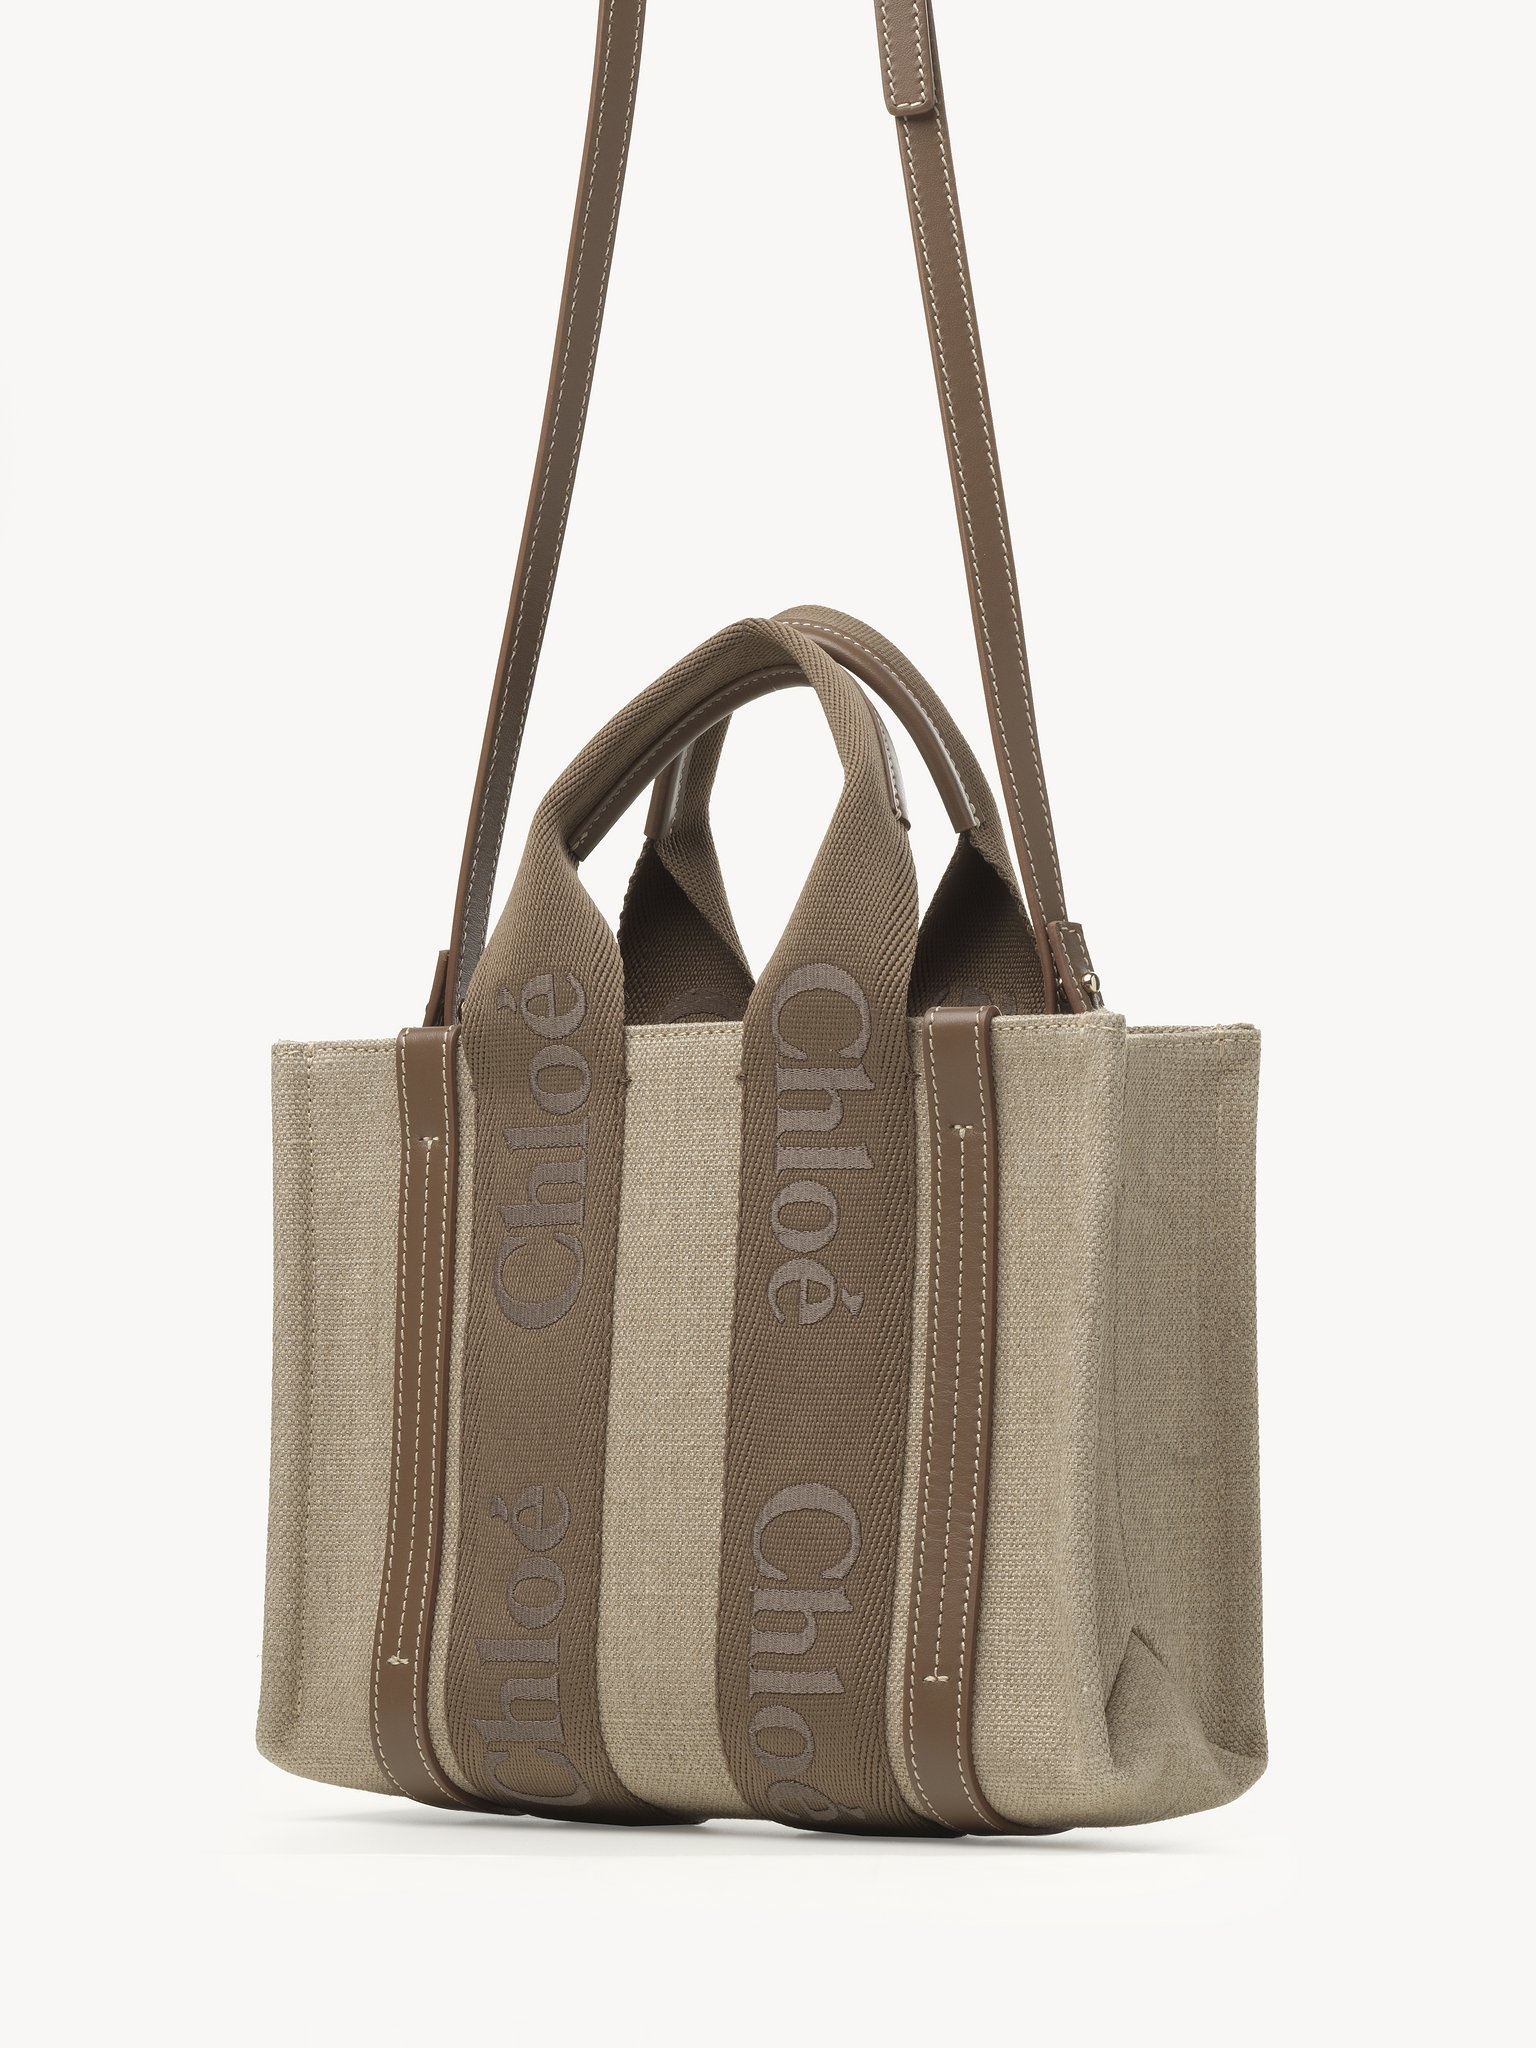 SMALL WOODY TOTE BAG IN LINEN - 3